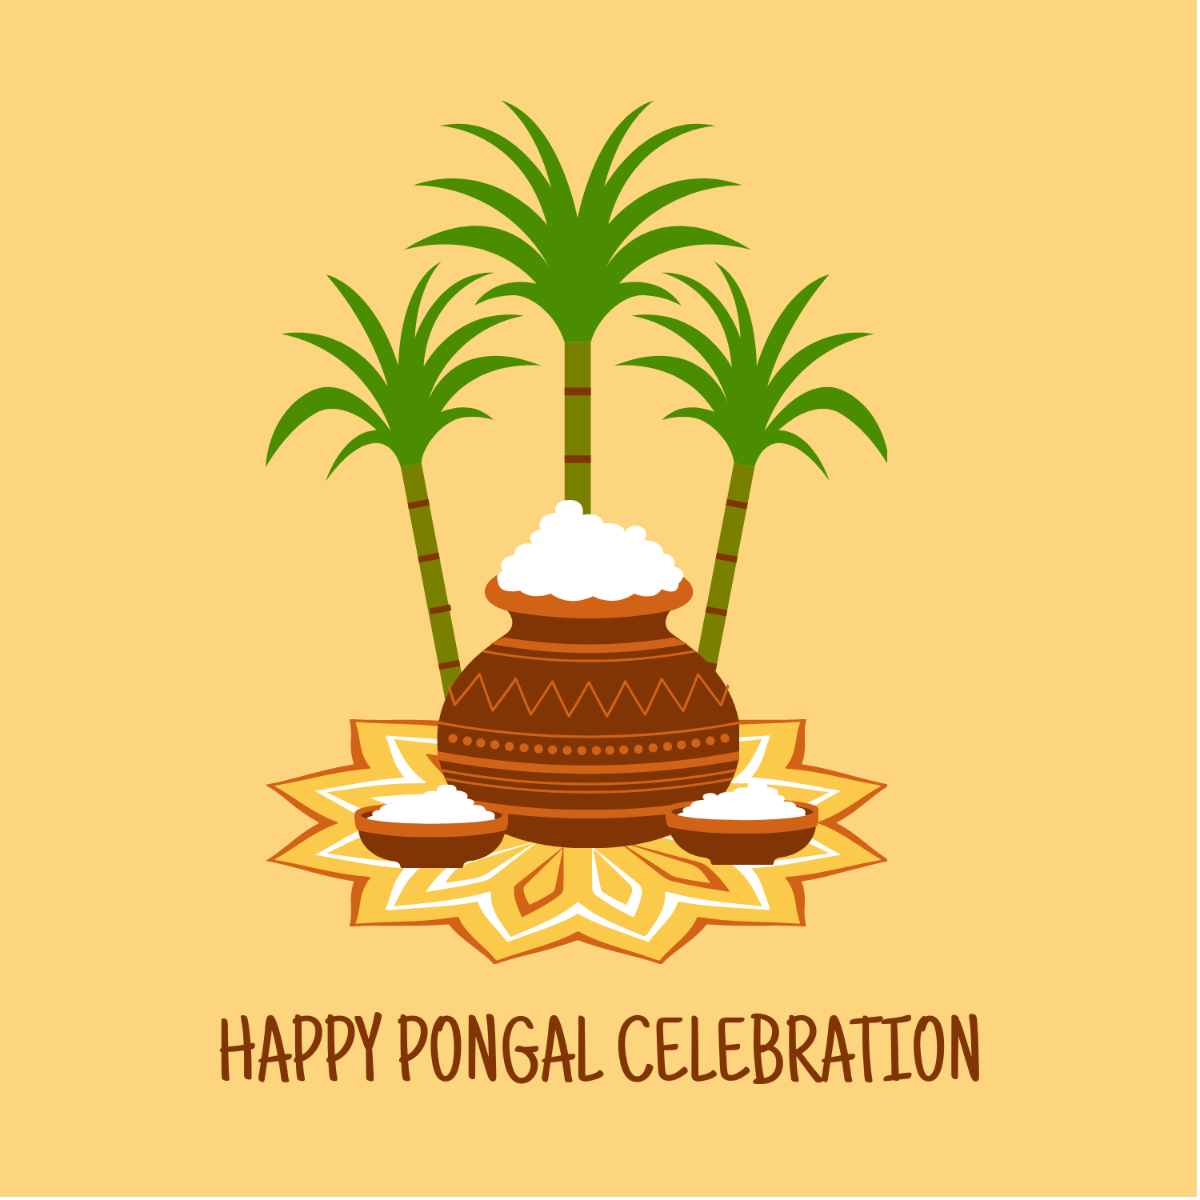 Free Pongal Celebration Vector Template